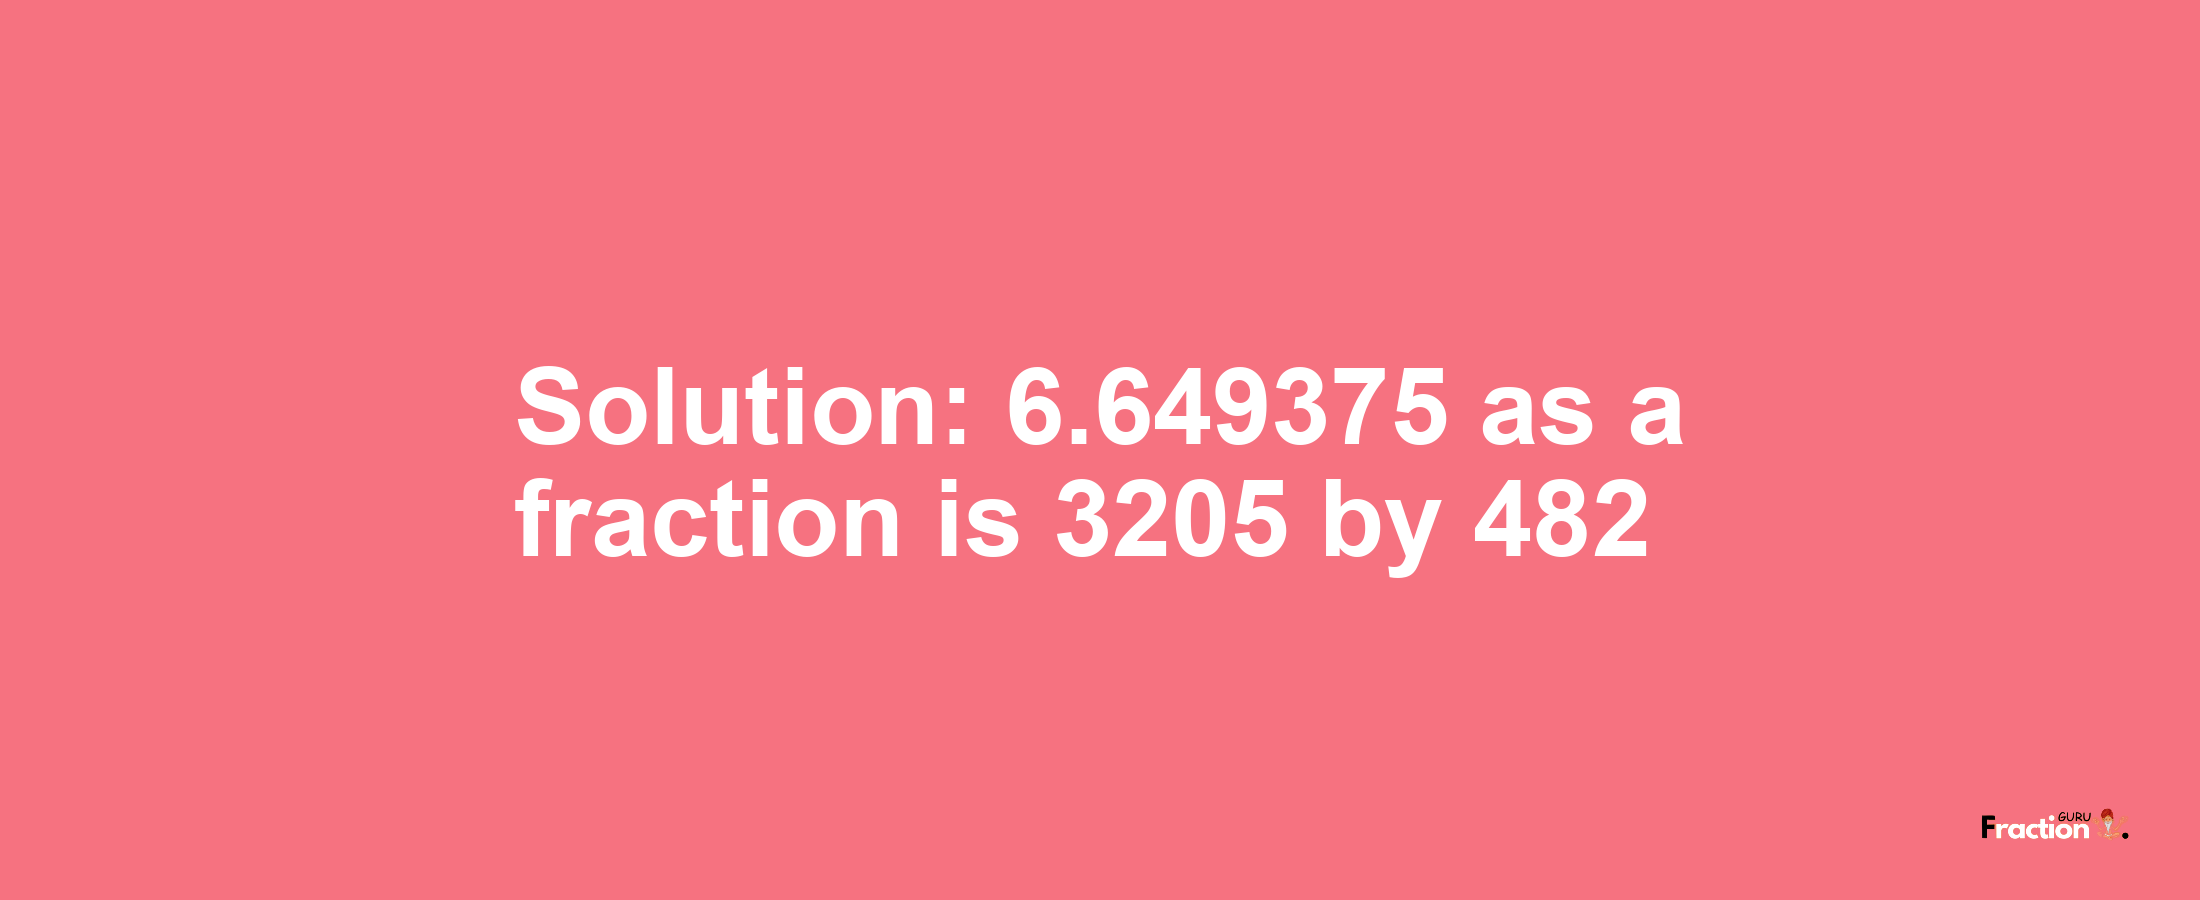 Solution:6.649375 as a fraction is 3205/482